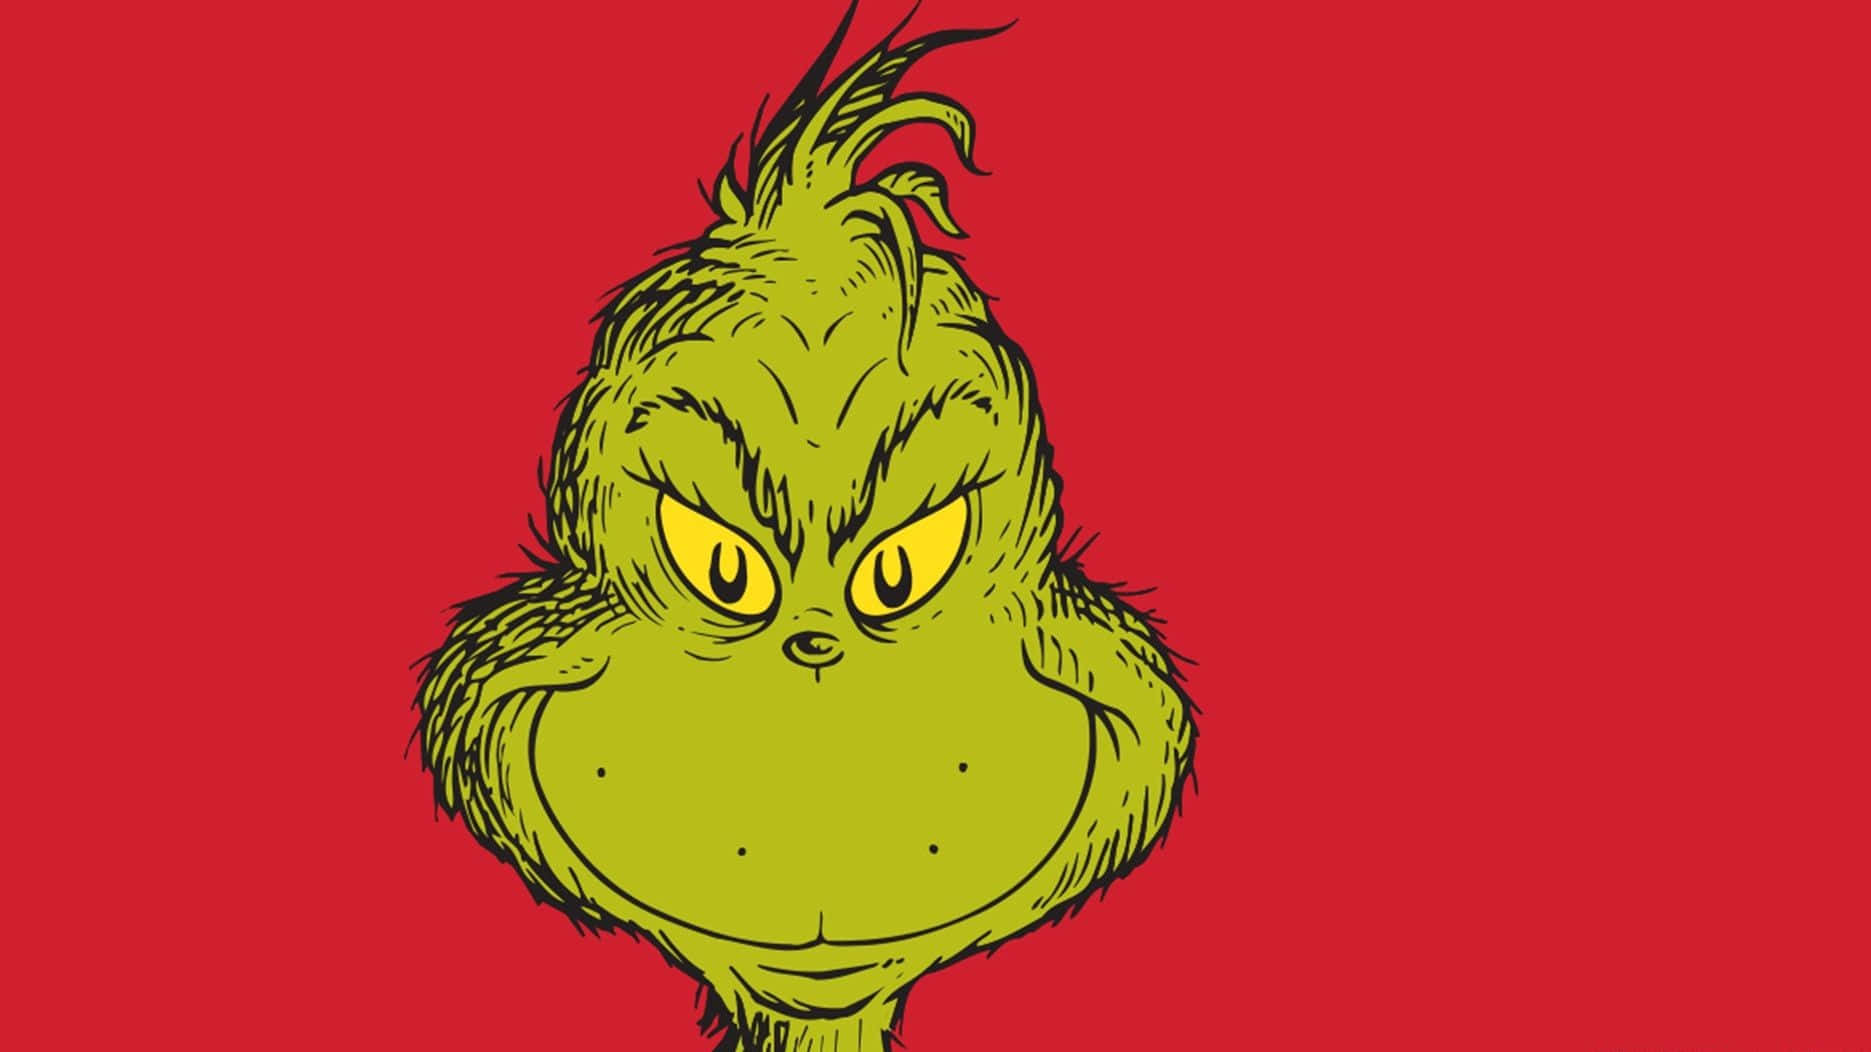 Bring the Grinch to your next Zoom call!